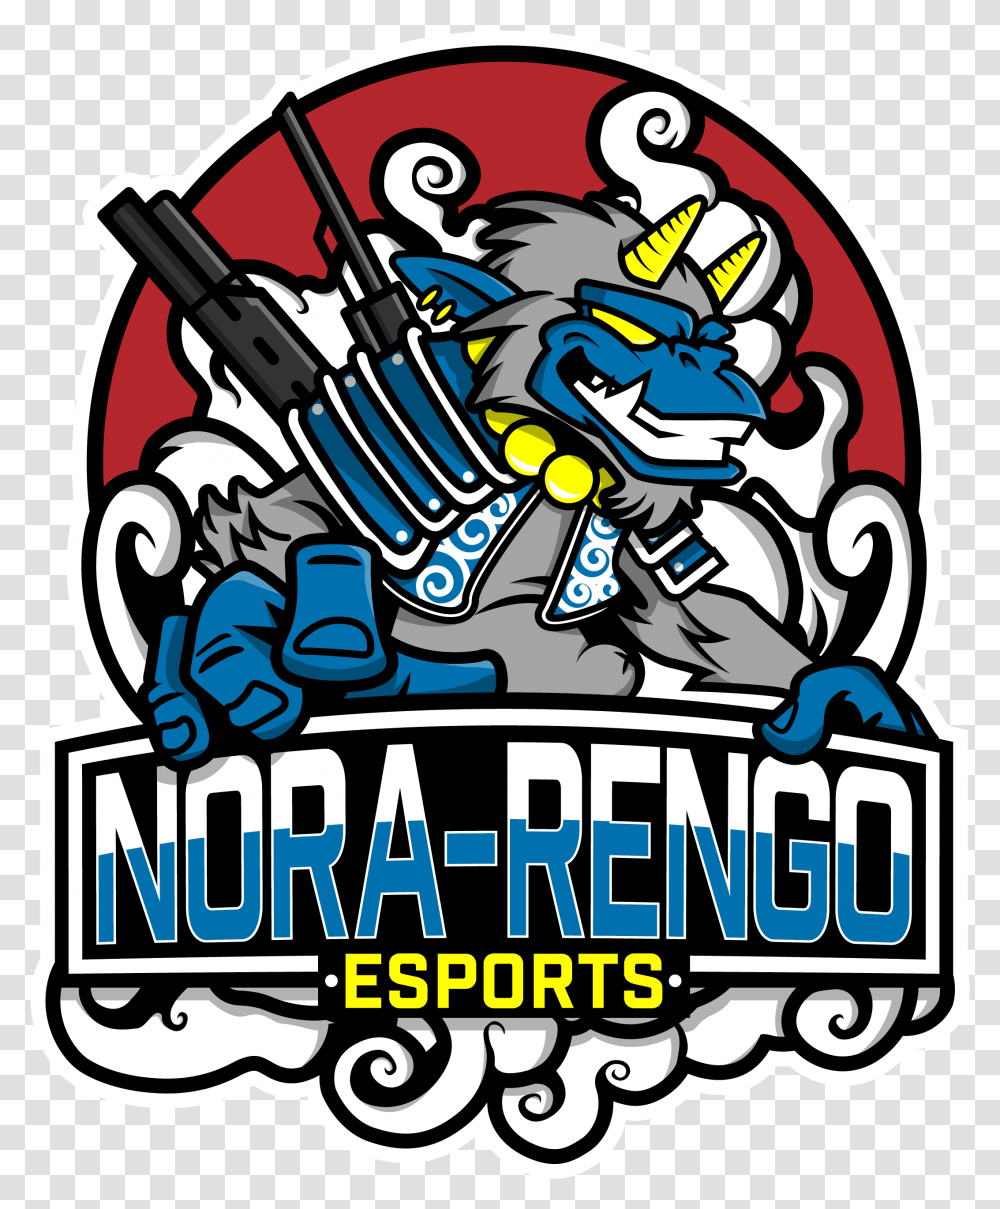 Rainbow Six Siege Gamers Without Borders Nora Rengo Wallpaper Phone, Leisure Activities, Graphics, Art, Outdoors Transparent Png